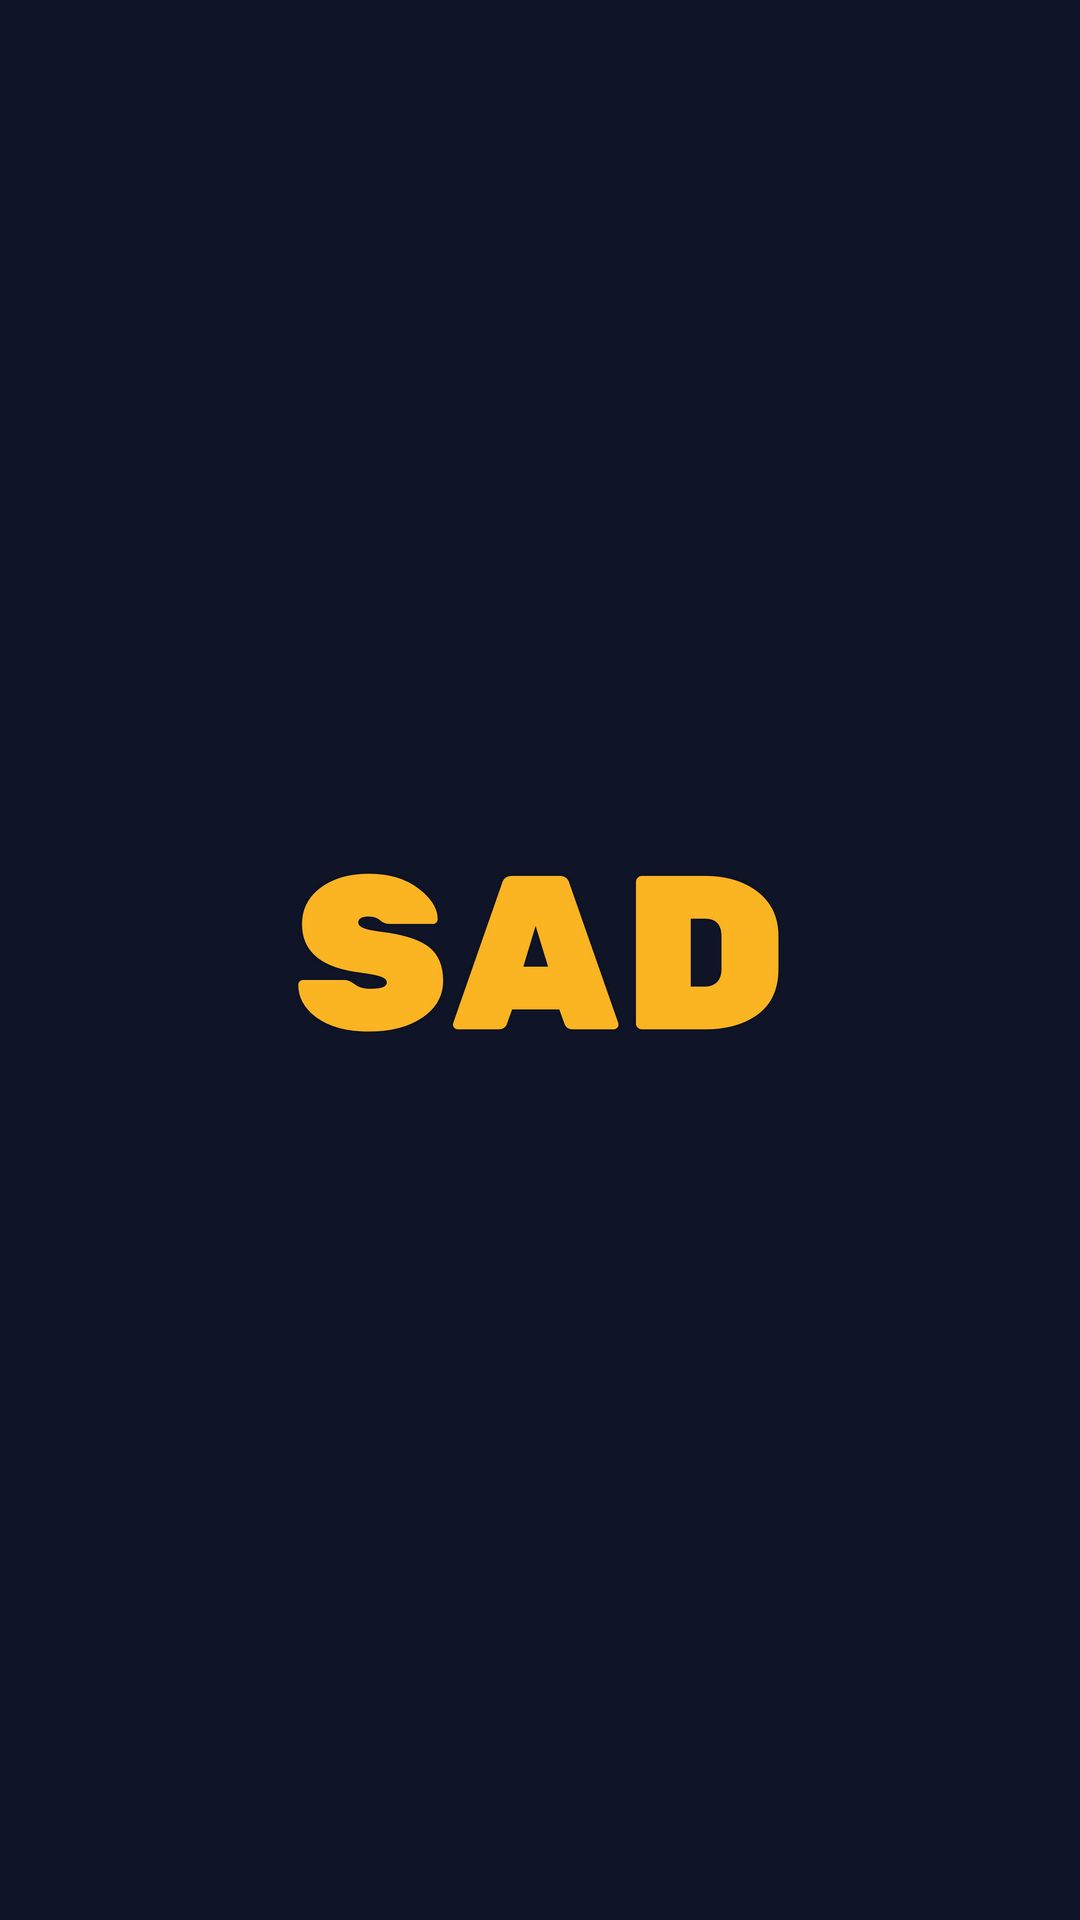 Sad Words Picture Wallpapers